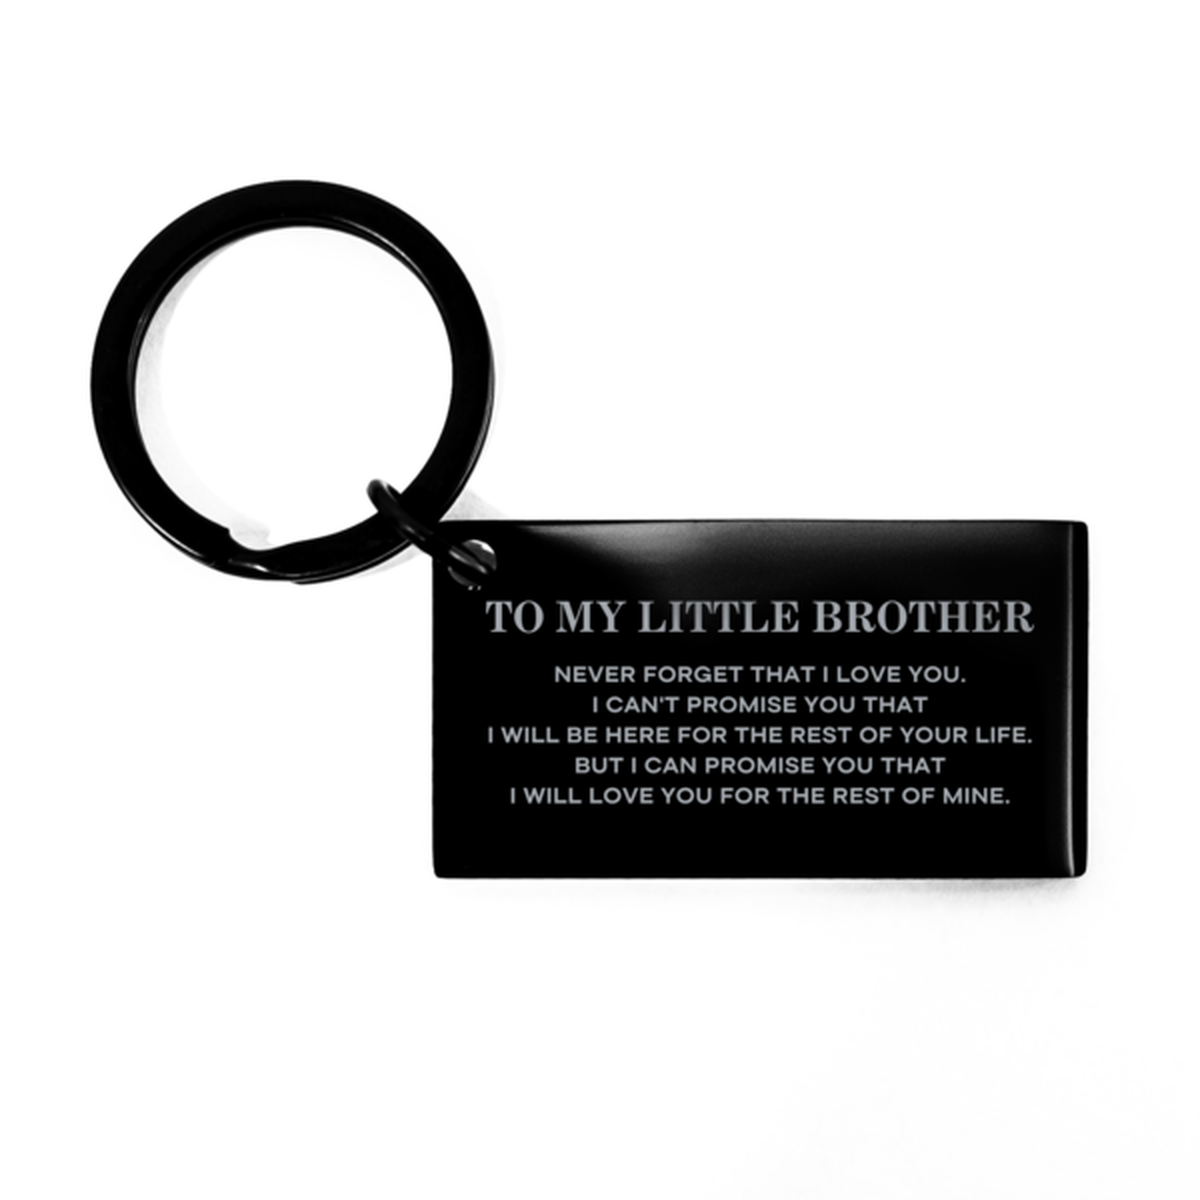 To My Little Brother Gifts, I will love you for the rest of mine, Love Little Brother Keychain, Birthday Christmas Unique Keychain For Little Brother